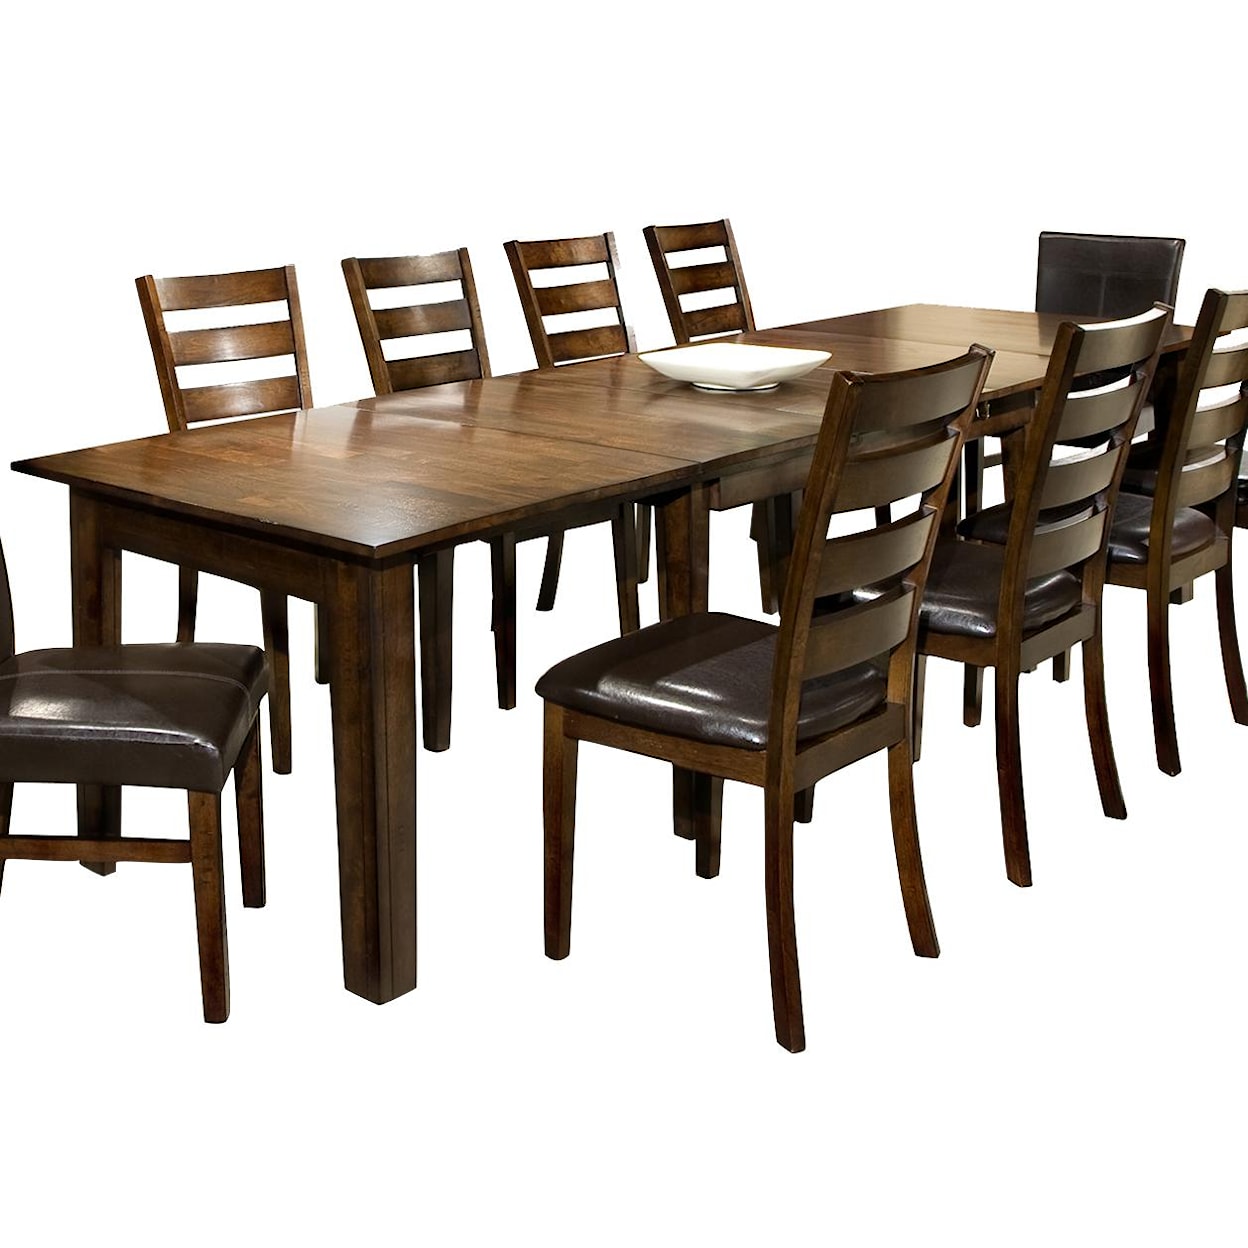 Intercon Kona Dining Table with 3 Leaves